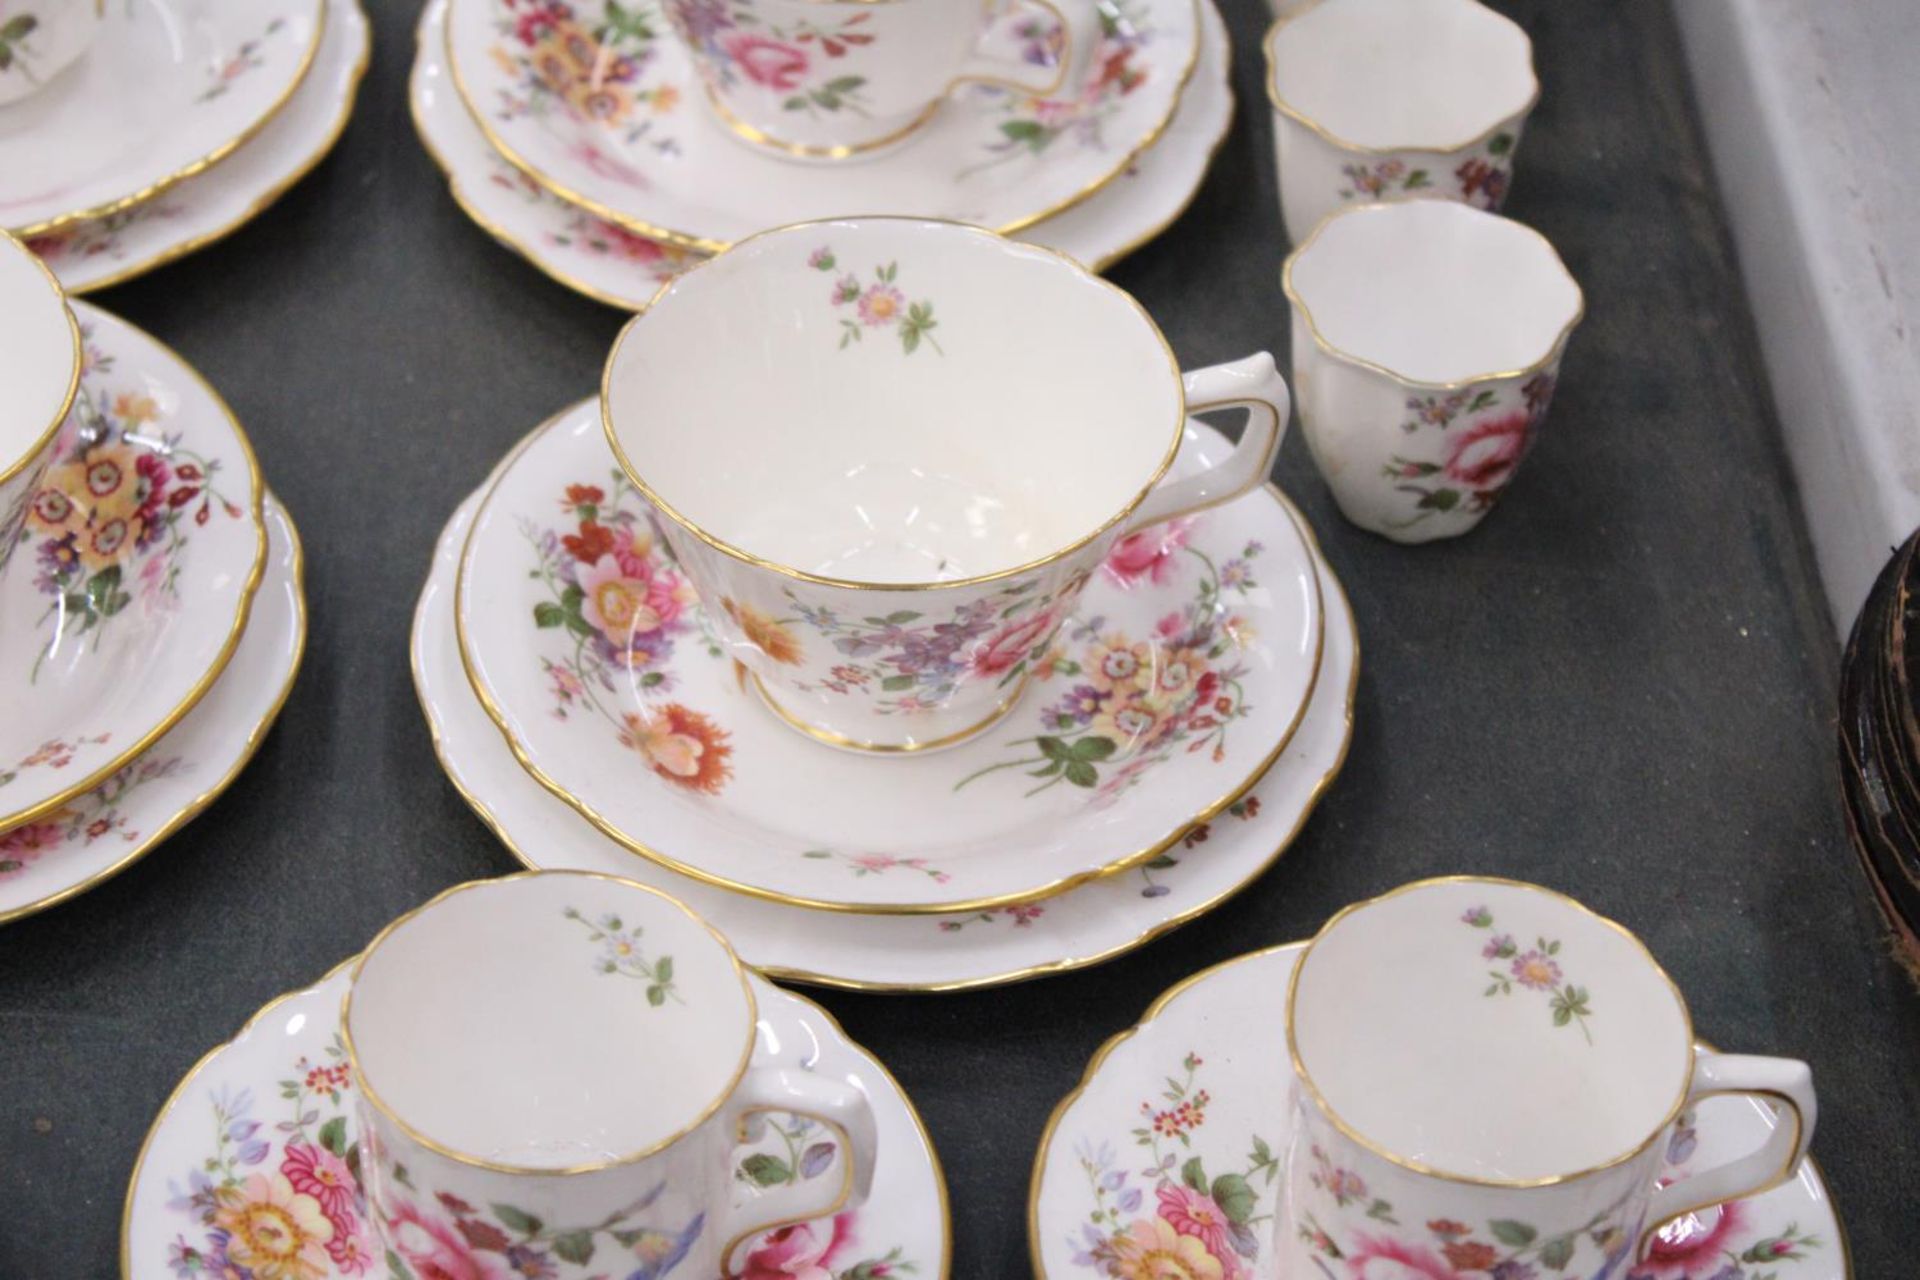 A COLLECTION OF ROYAL CROWN DERBY 'DERBY POSIES' CHINA TO INCLUDE CUPS AND SAUCERS, JUG, BEAKERS, - Image 4 of 6